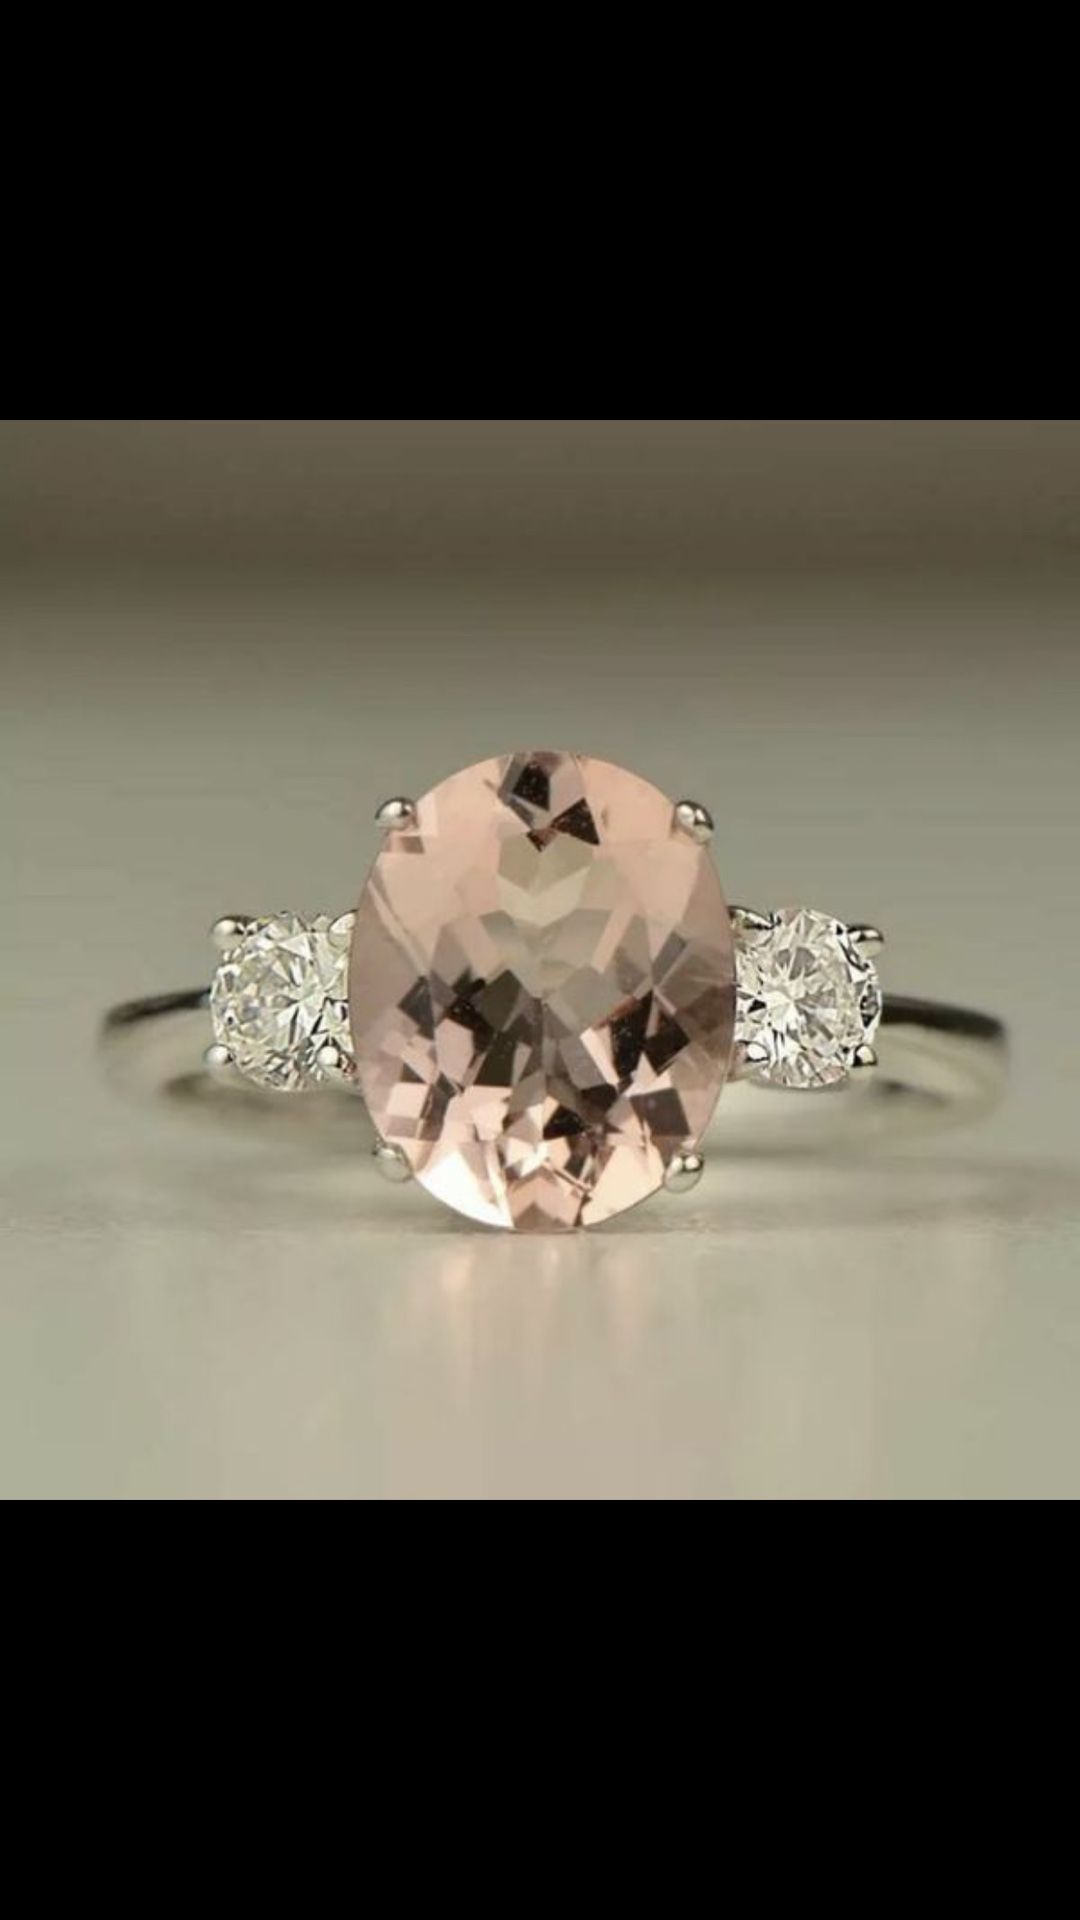 Silver morganite ring women’s jewelry accessory fashion ring size 6,7,8 available